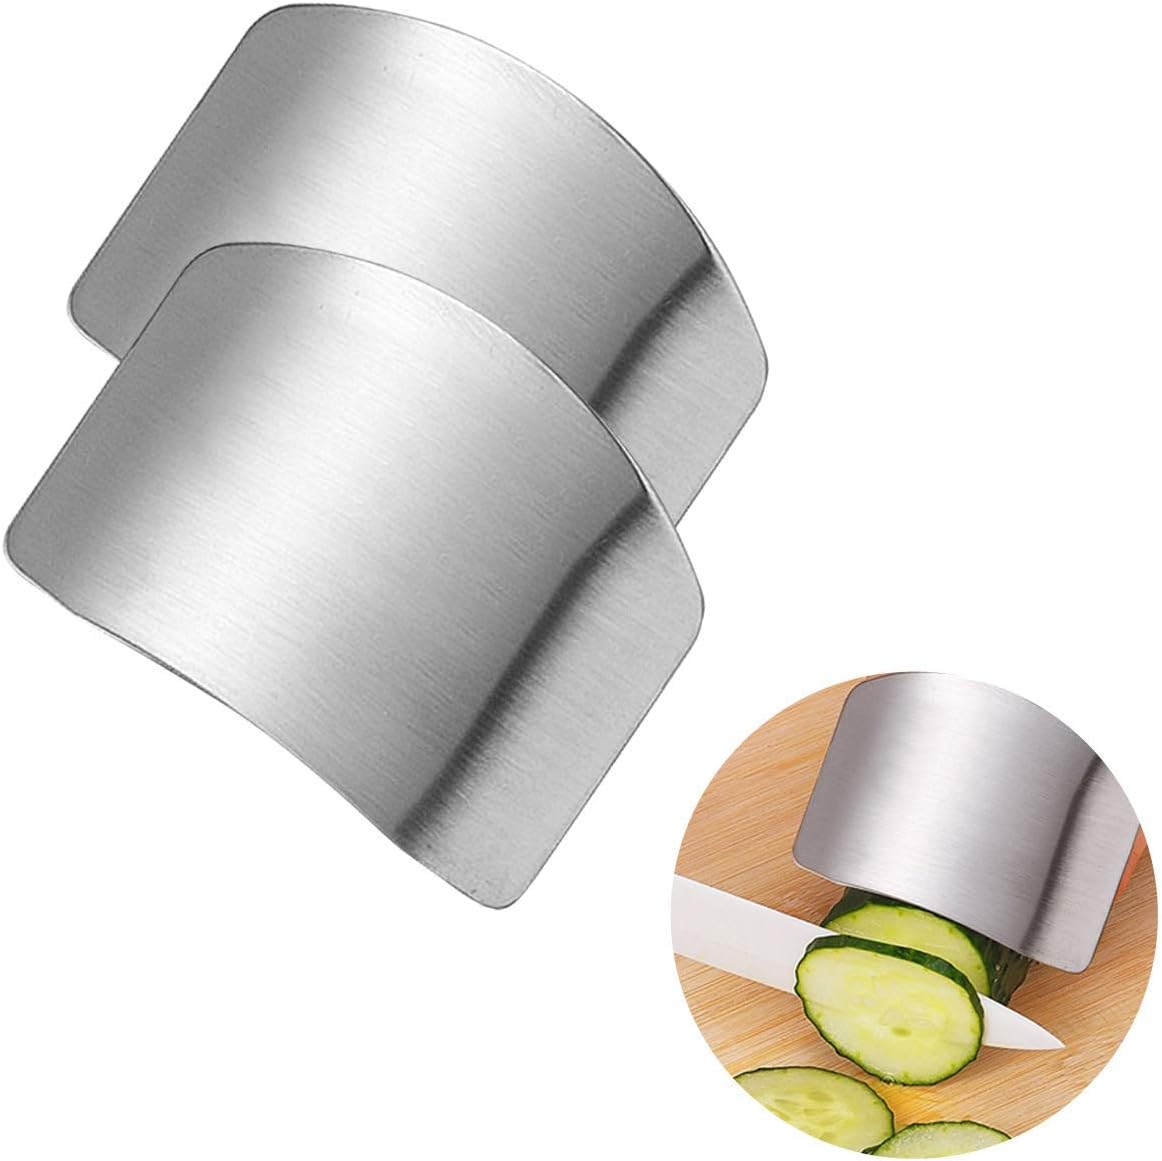 Stainless steel hand guard finger protector for safe cutting